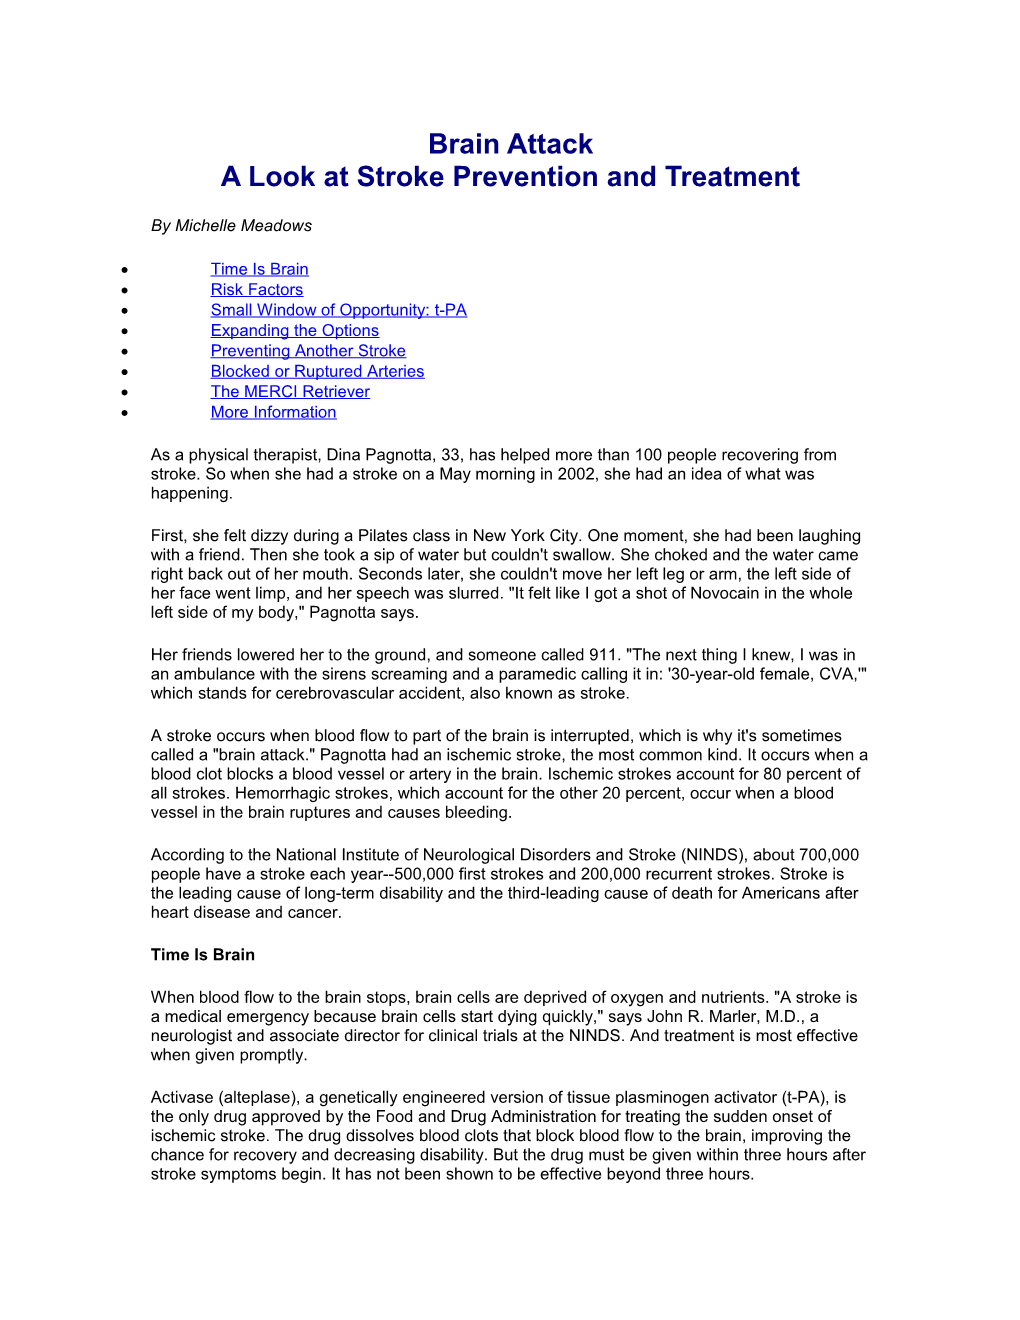 Brain Attack a Look at Stroke Prevention and Treatment